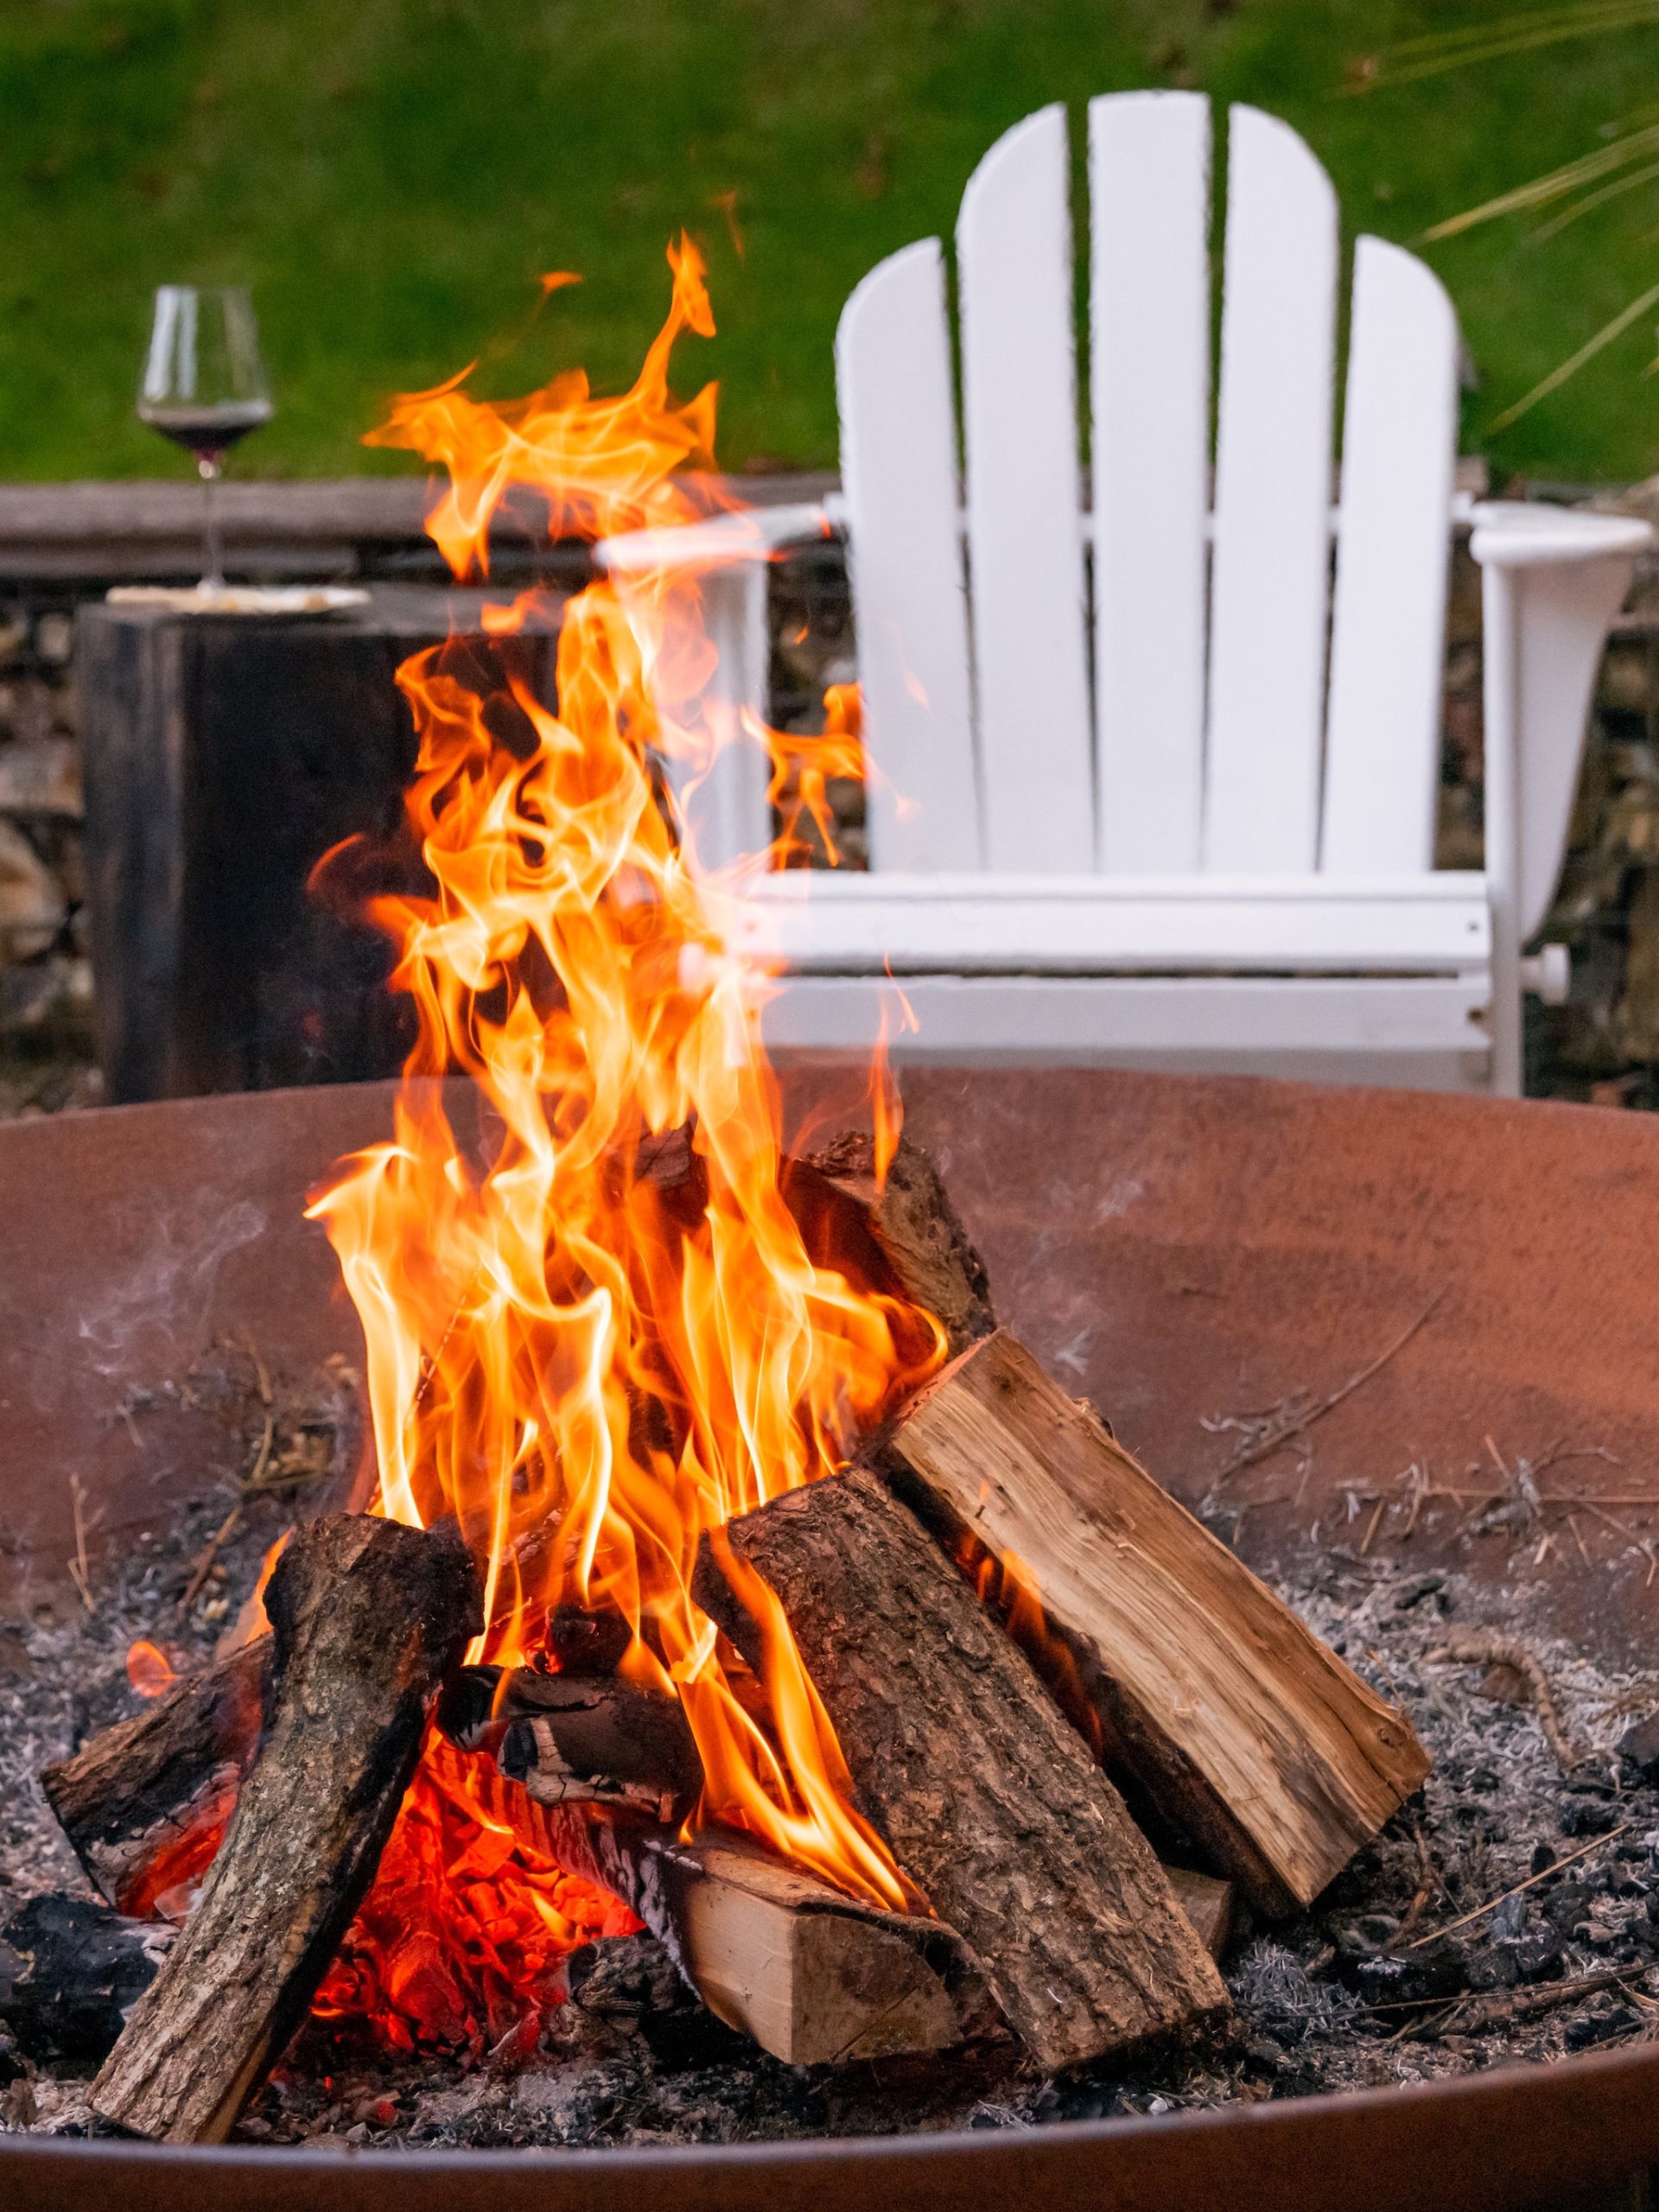 Fire Pit On Your Wood Or Composite Deck, Are Fire Pits Legal In Houston